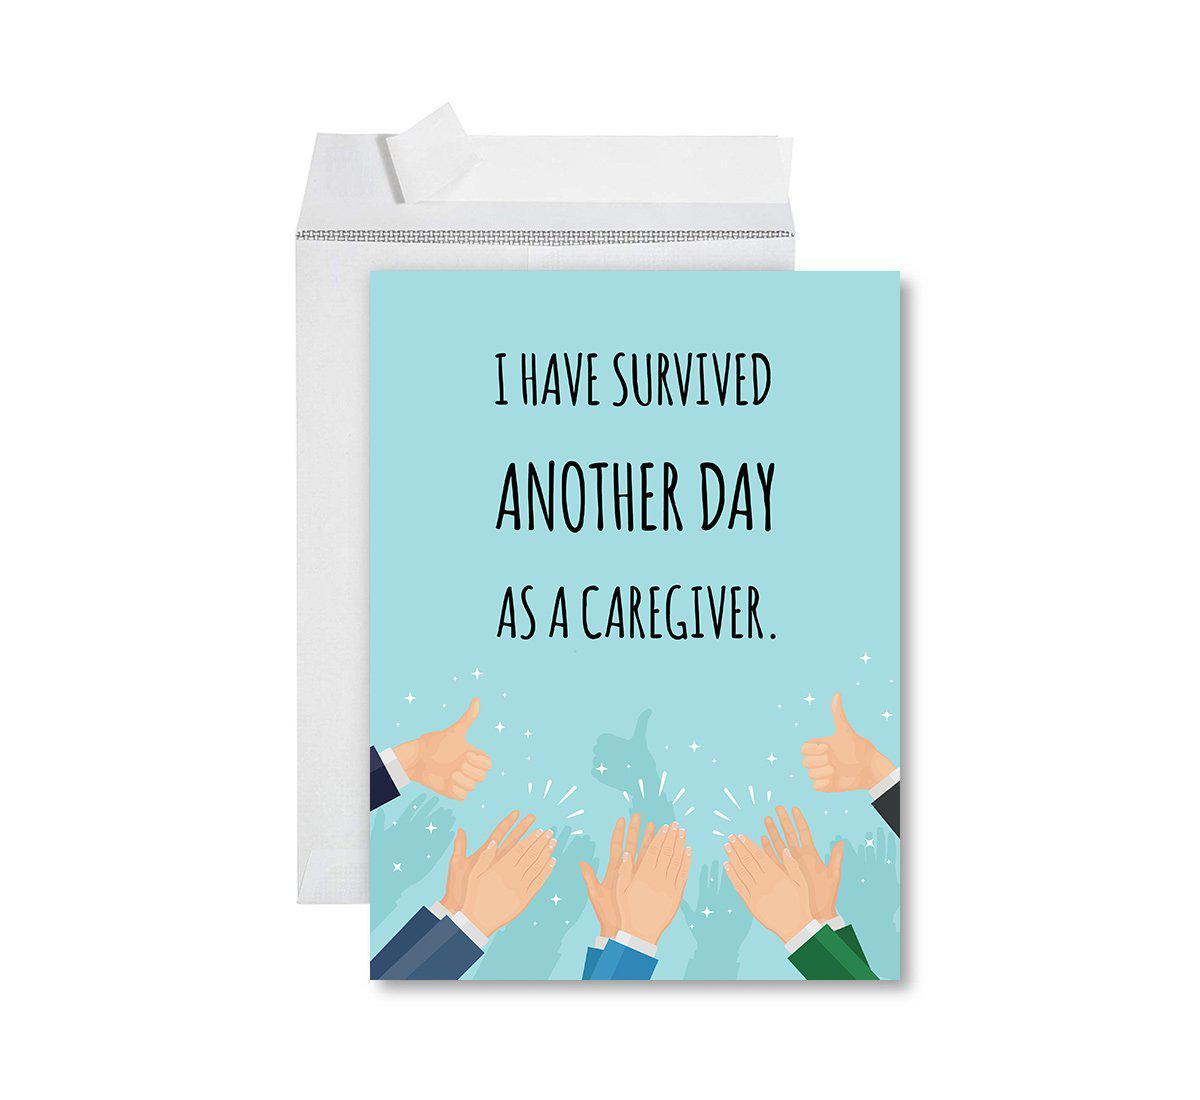 Funny National Caregivers Day Jumbo Card, Blank Greeting Card with Envelope For Caregiver-Set of 1-Andaz Press-Another Day As A Caregiver-